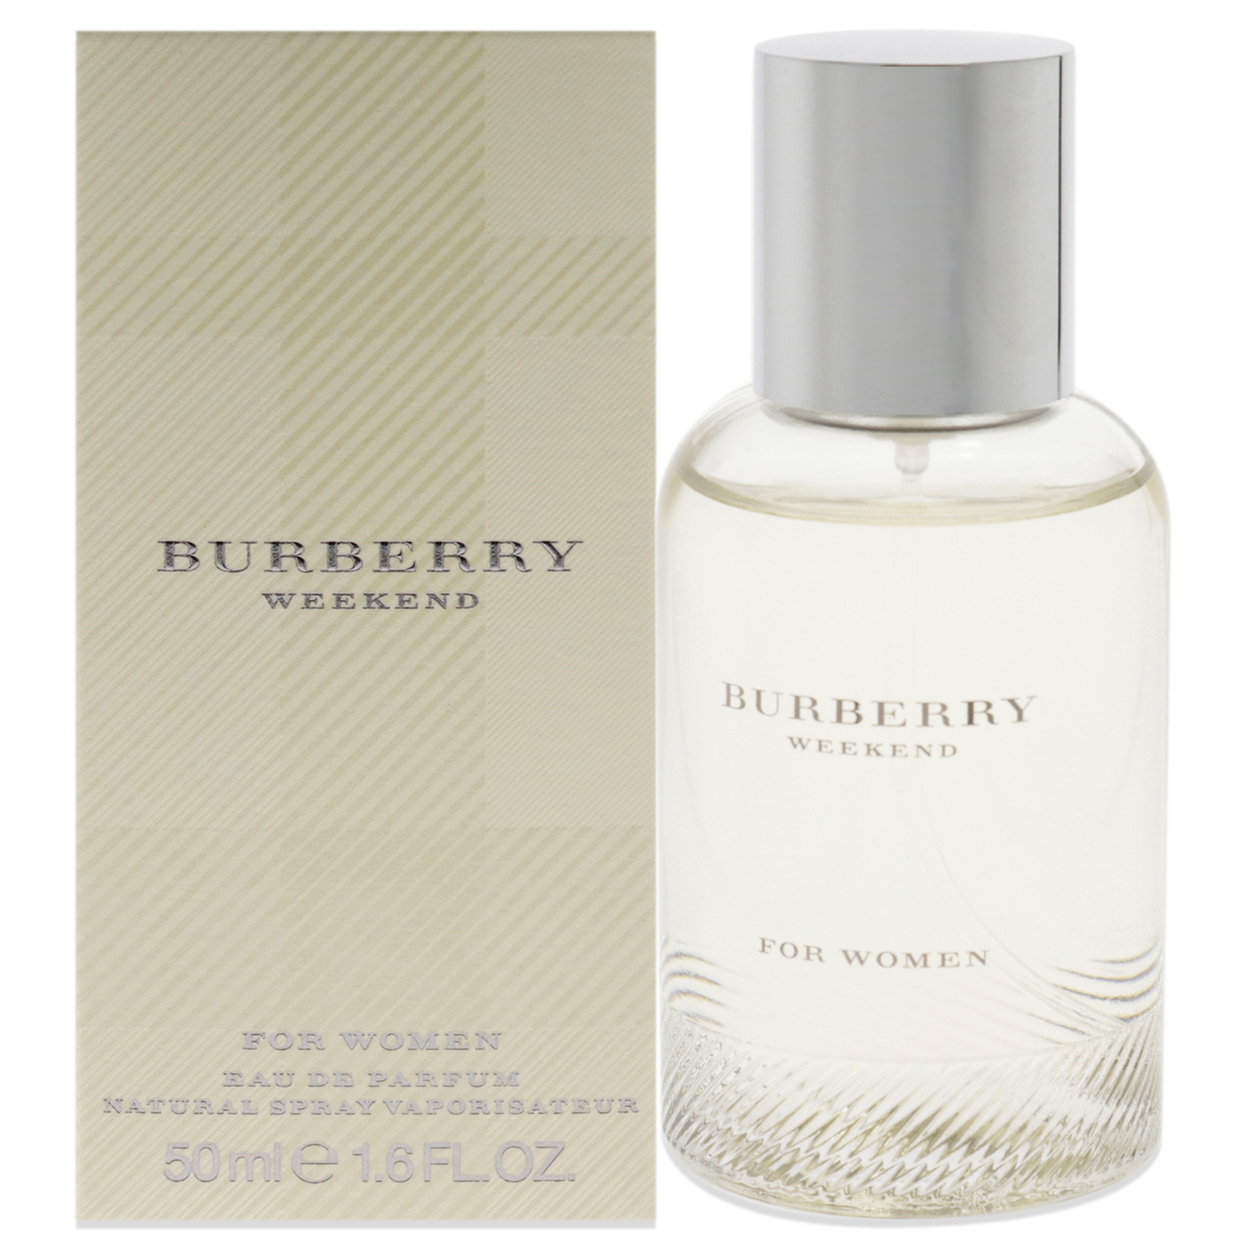 Burberry Weekend by Burberry for Women - 1.7 oz EDP Spray - image 1 of 2